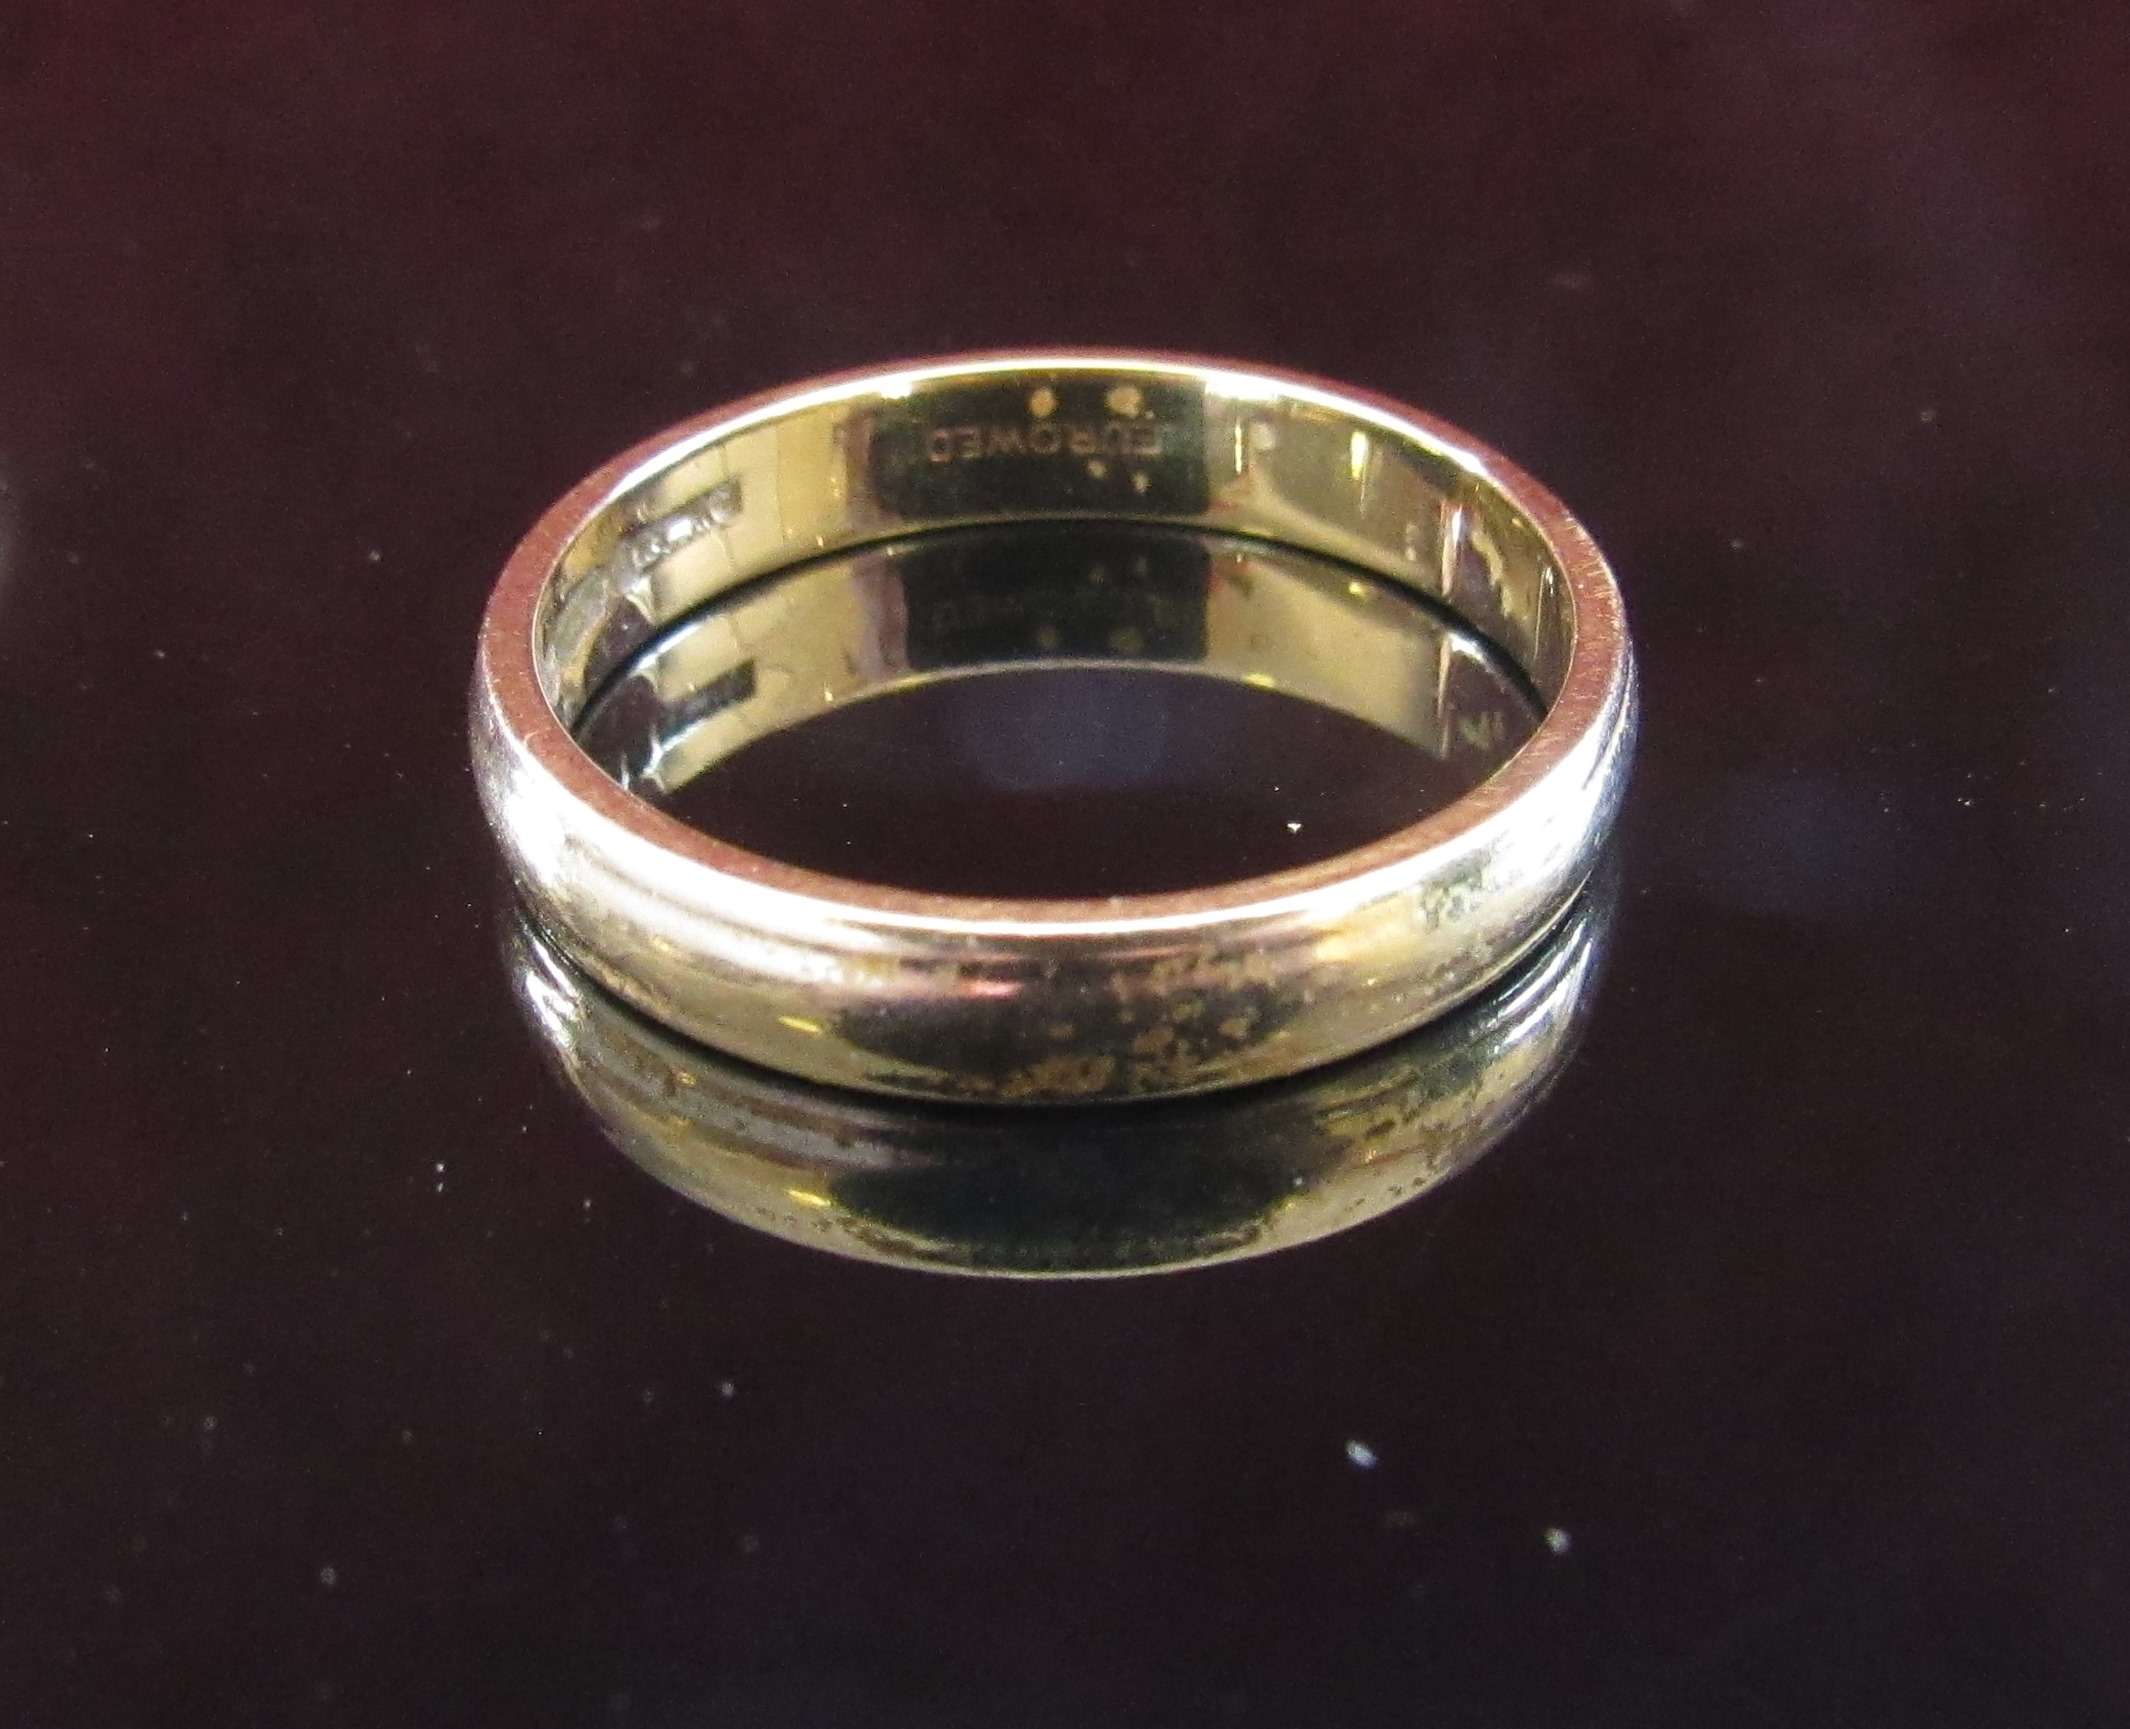 A 9ct gold wedding band, 4mm wide.